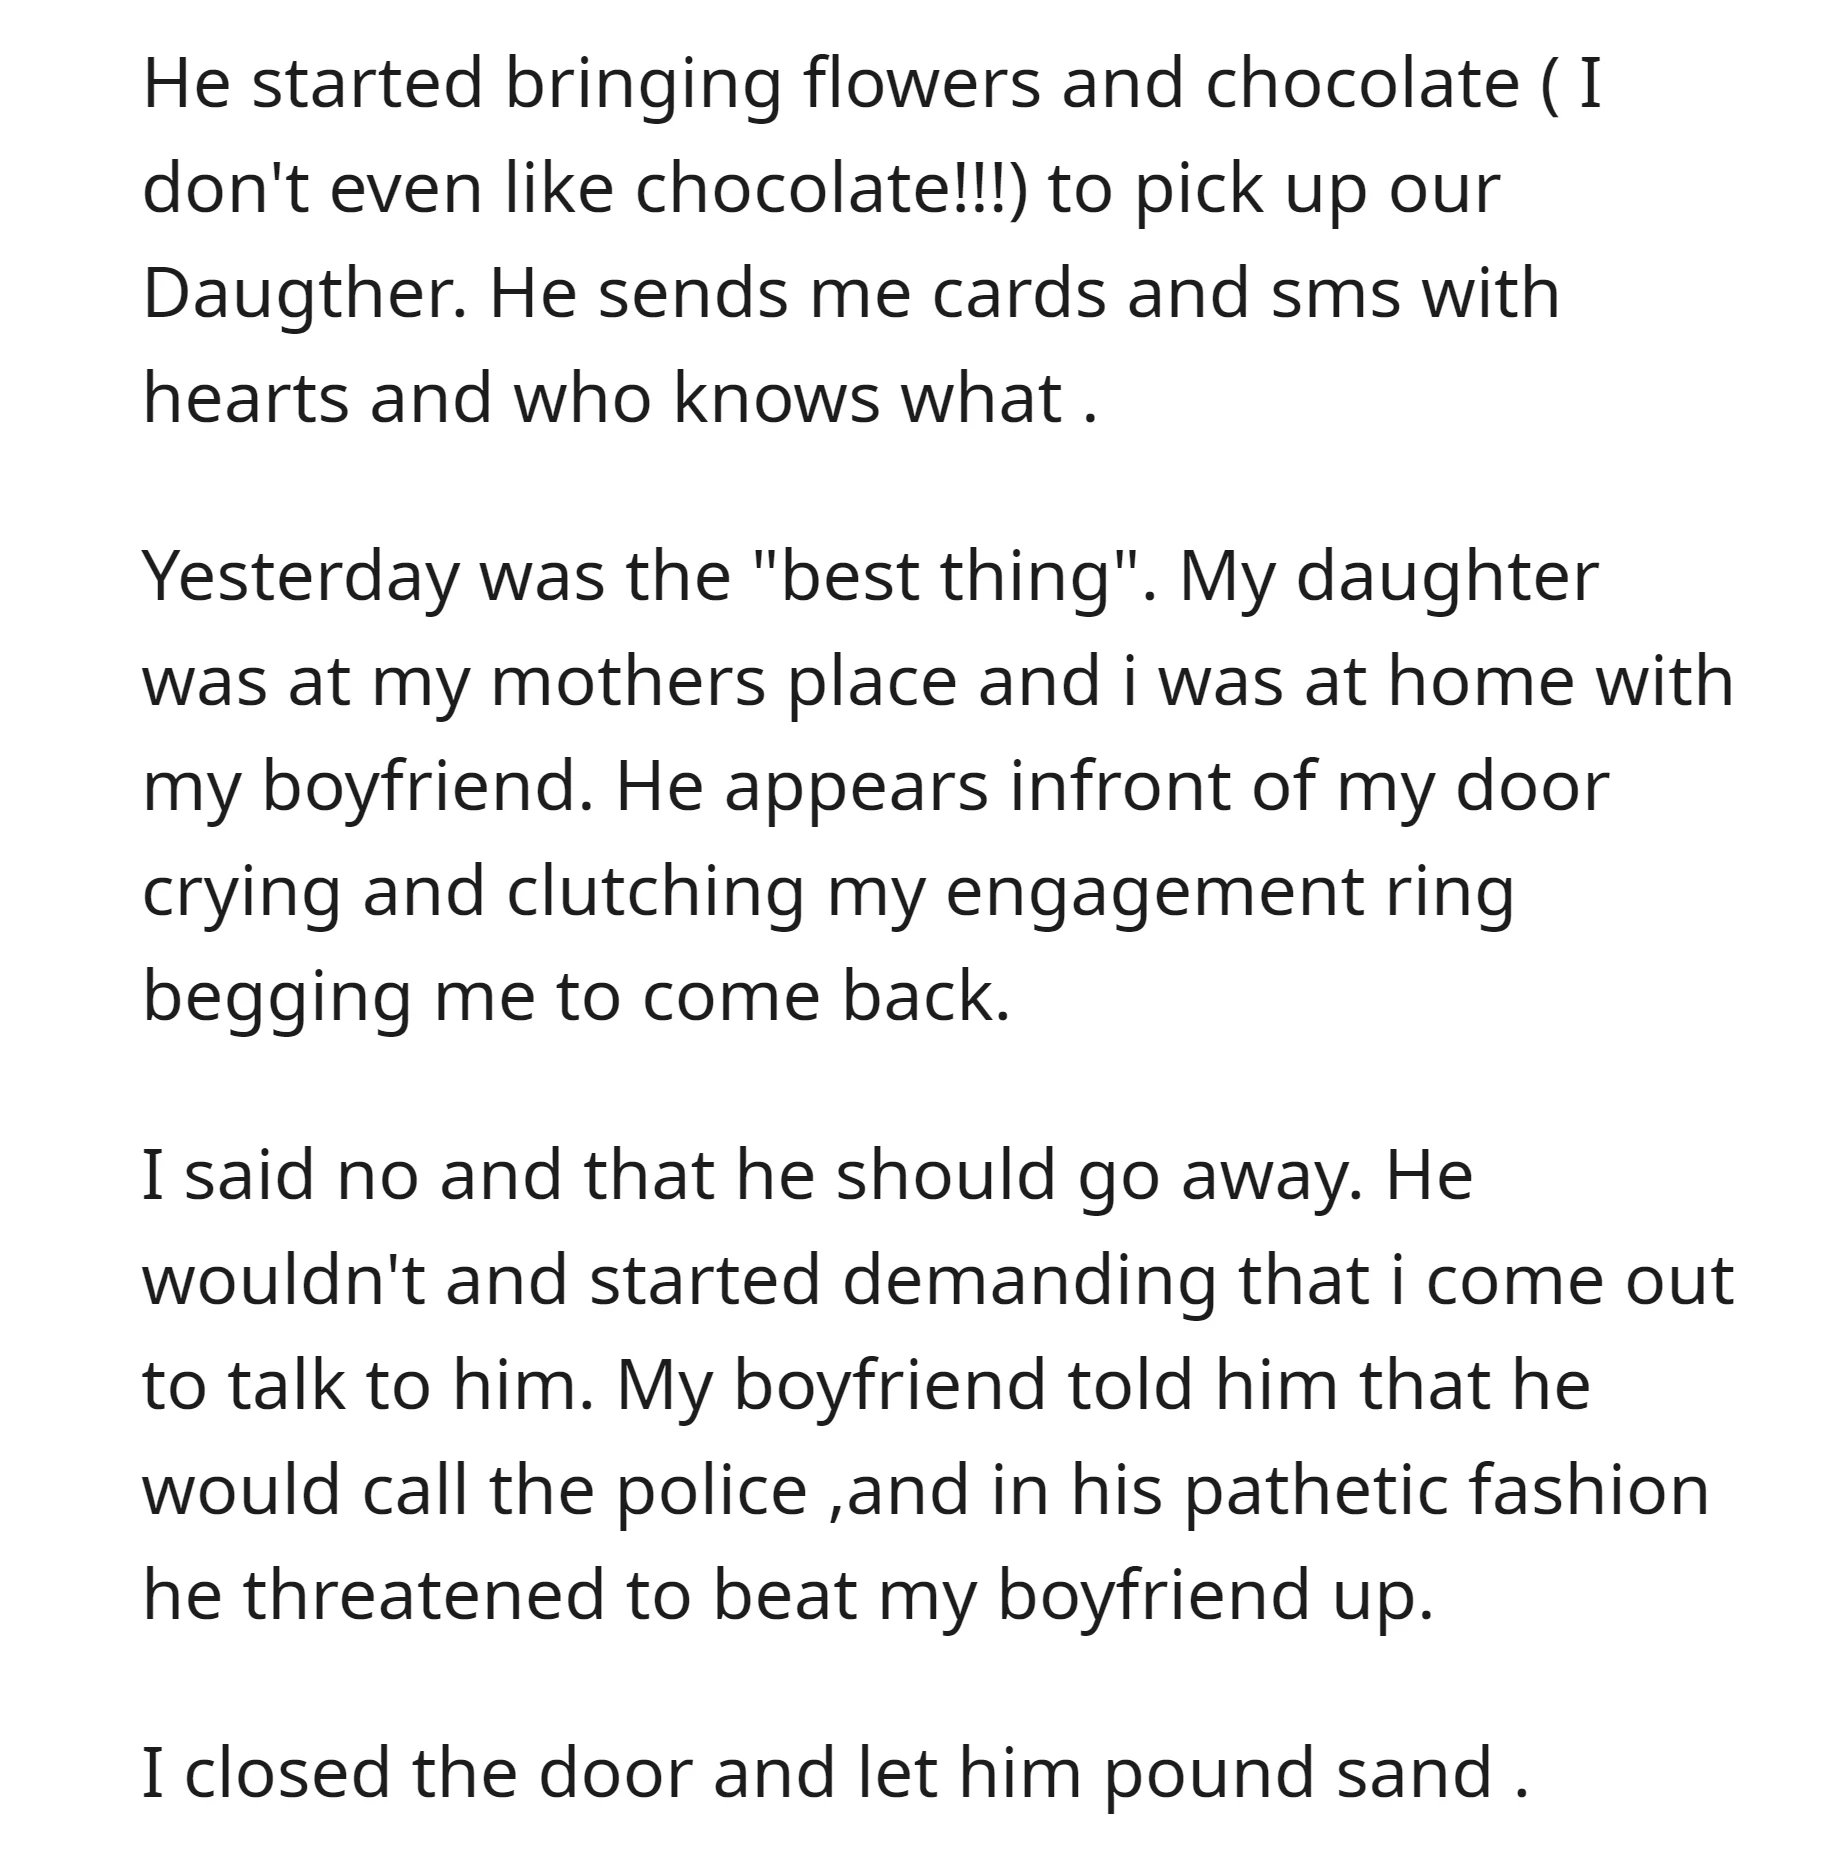 OP's ex-husband began making romantic gestures and wanted back in